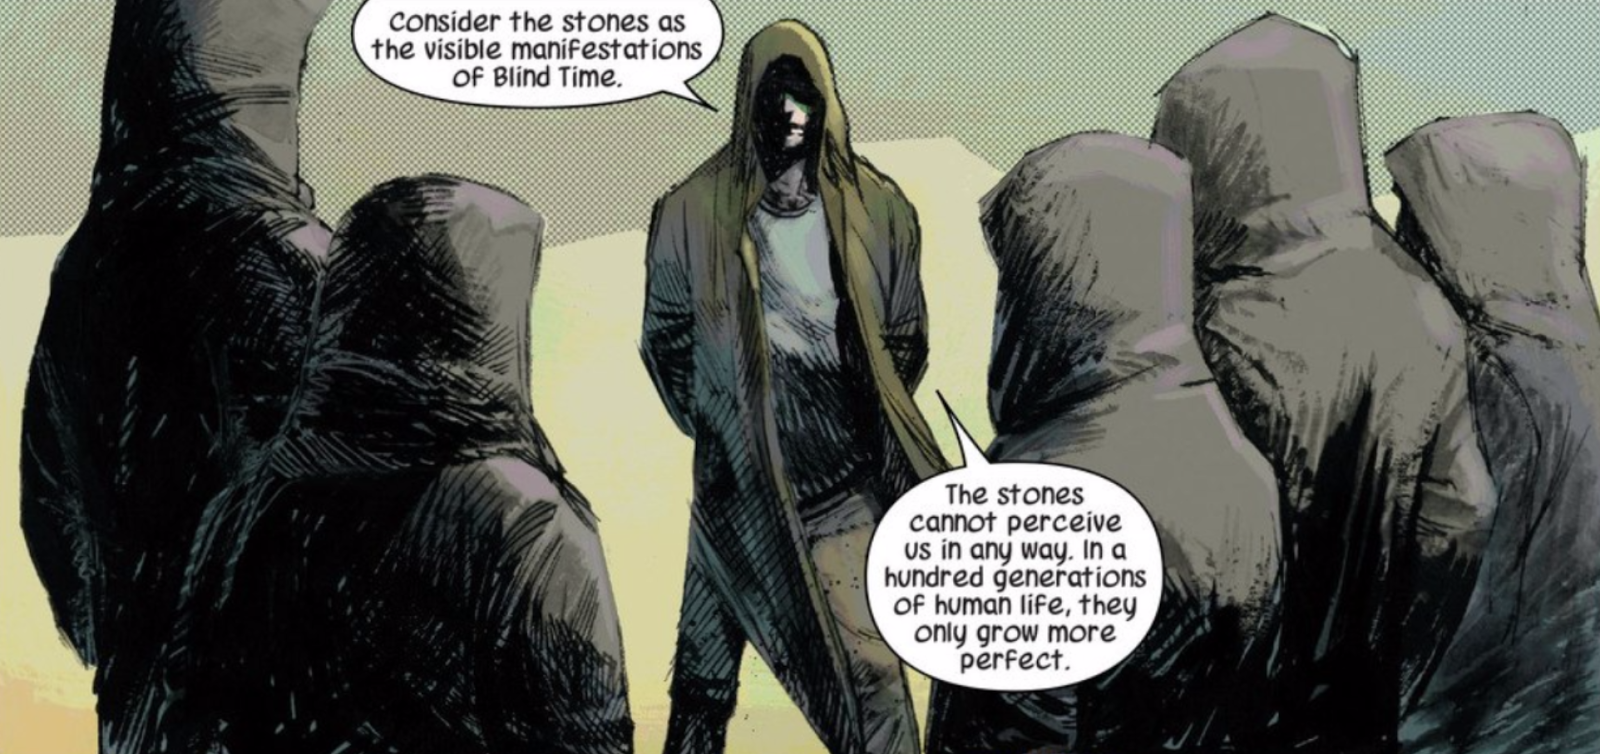 Karnak Is The Biggest Jerk In The Marvel Universe Right Now